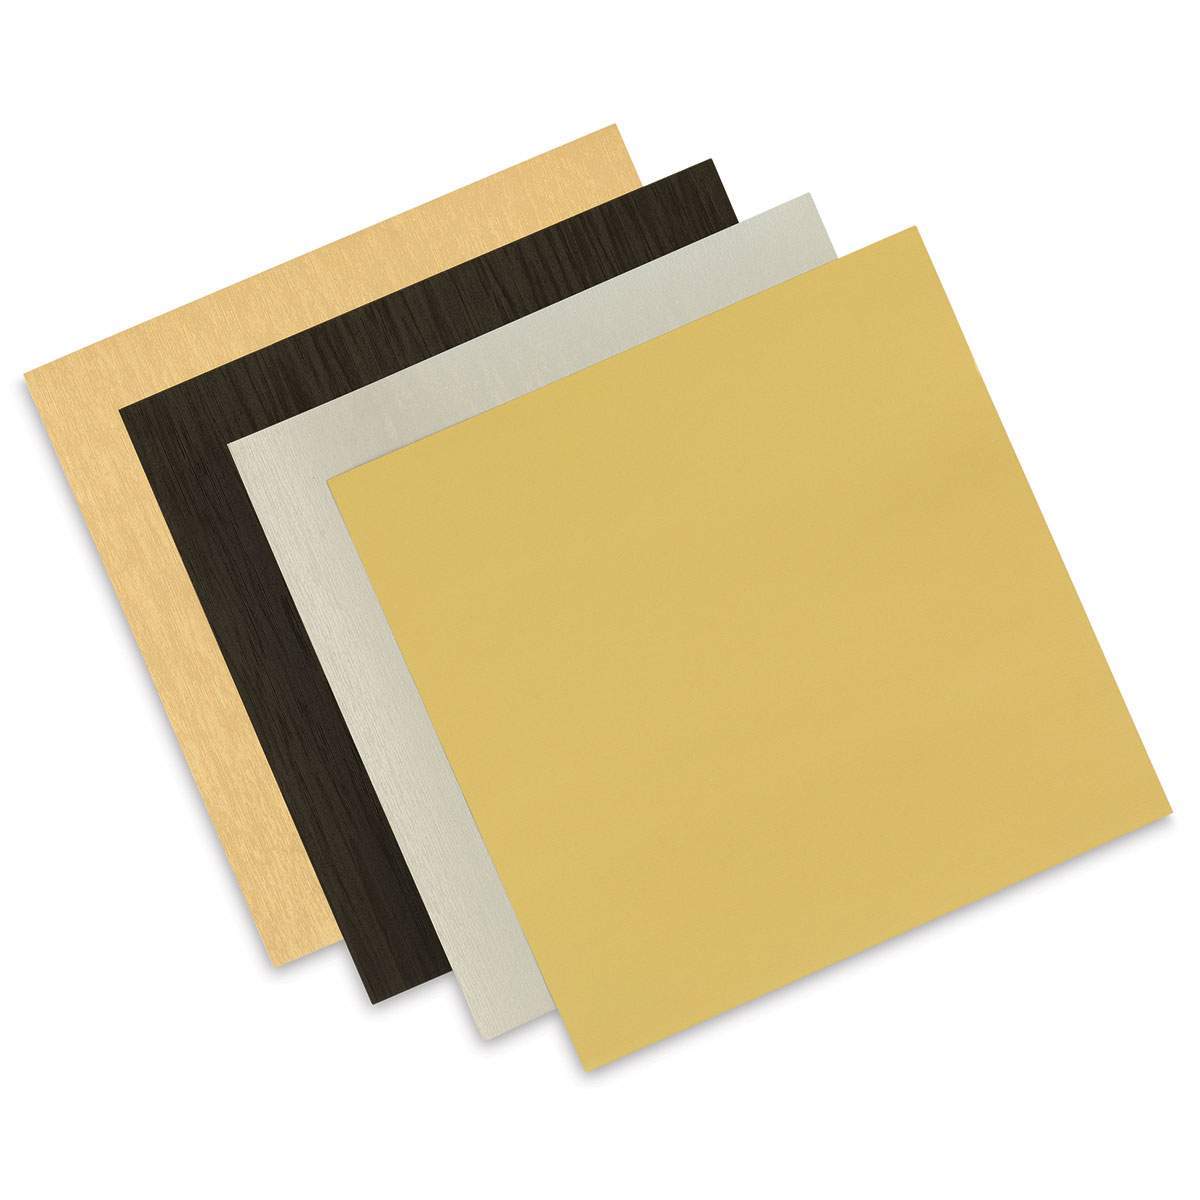 Hygloss Metallic Foil Papers